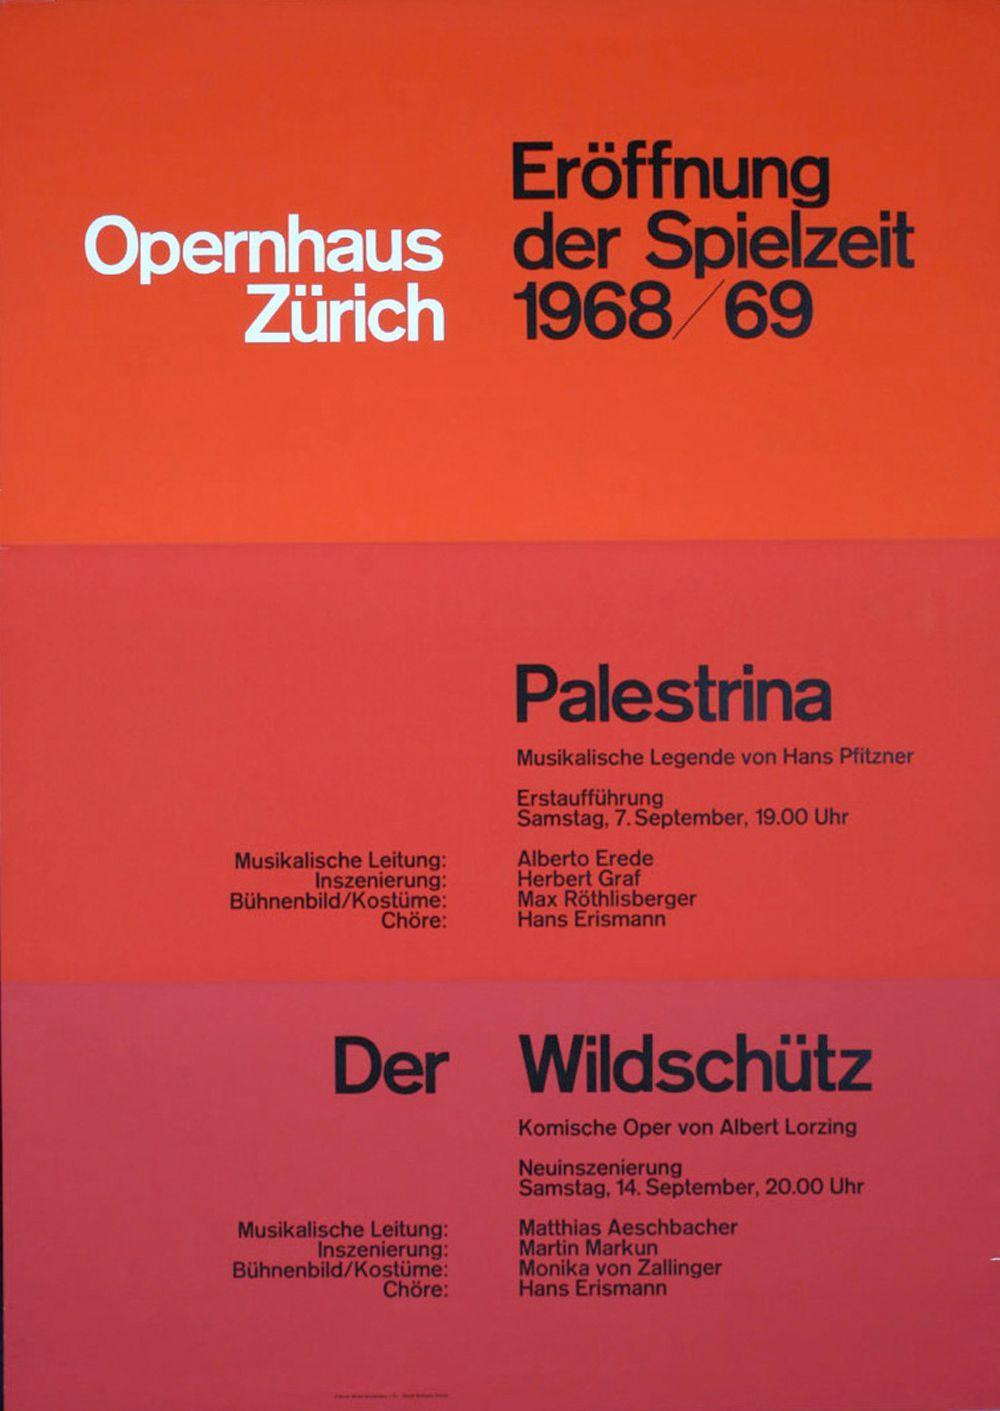 The Swiss Style The Swiss Style is a term used to describe the new approach to graphic design that came from Switzerland in the 1960 s.